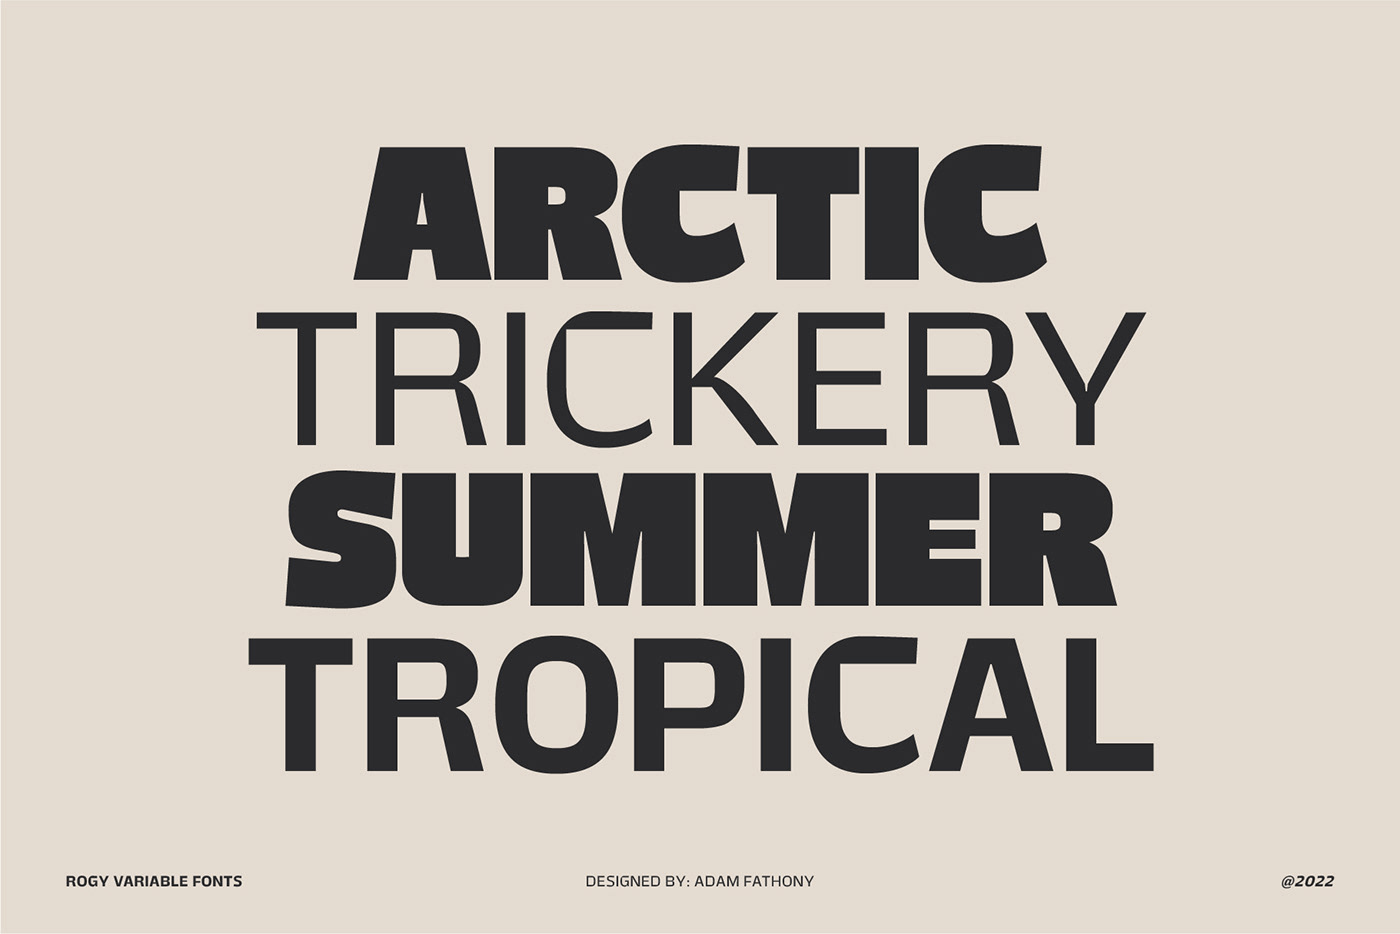 June Expt variable font.